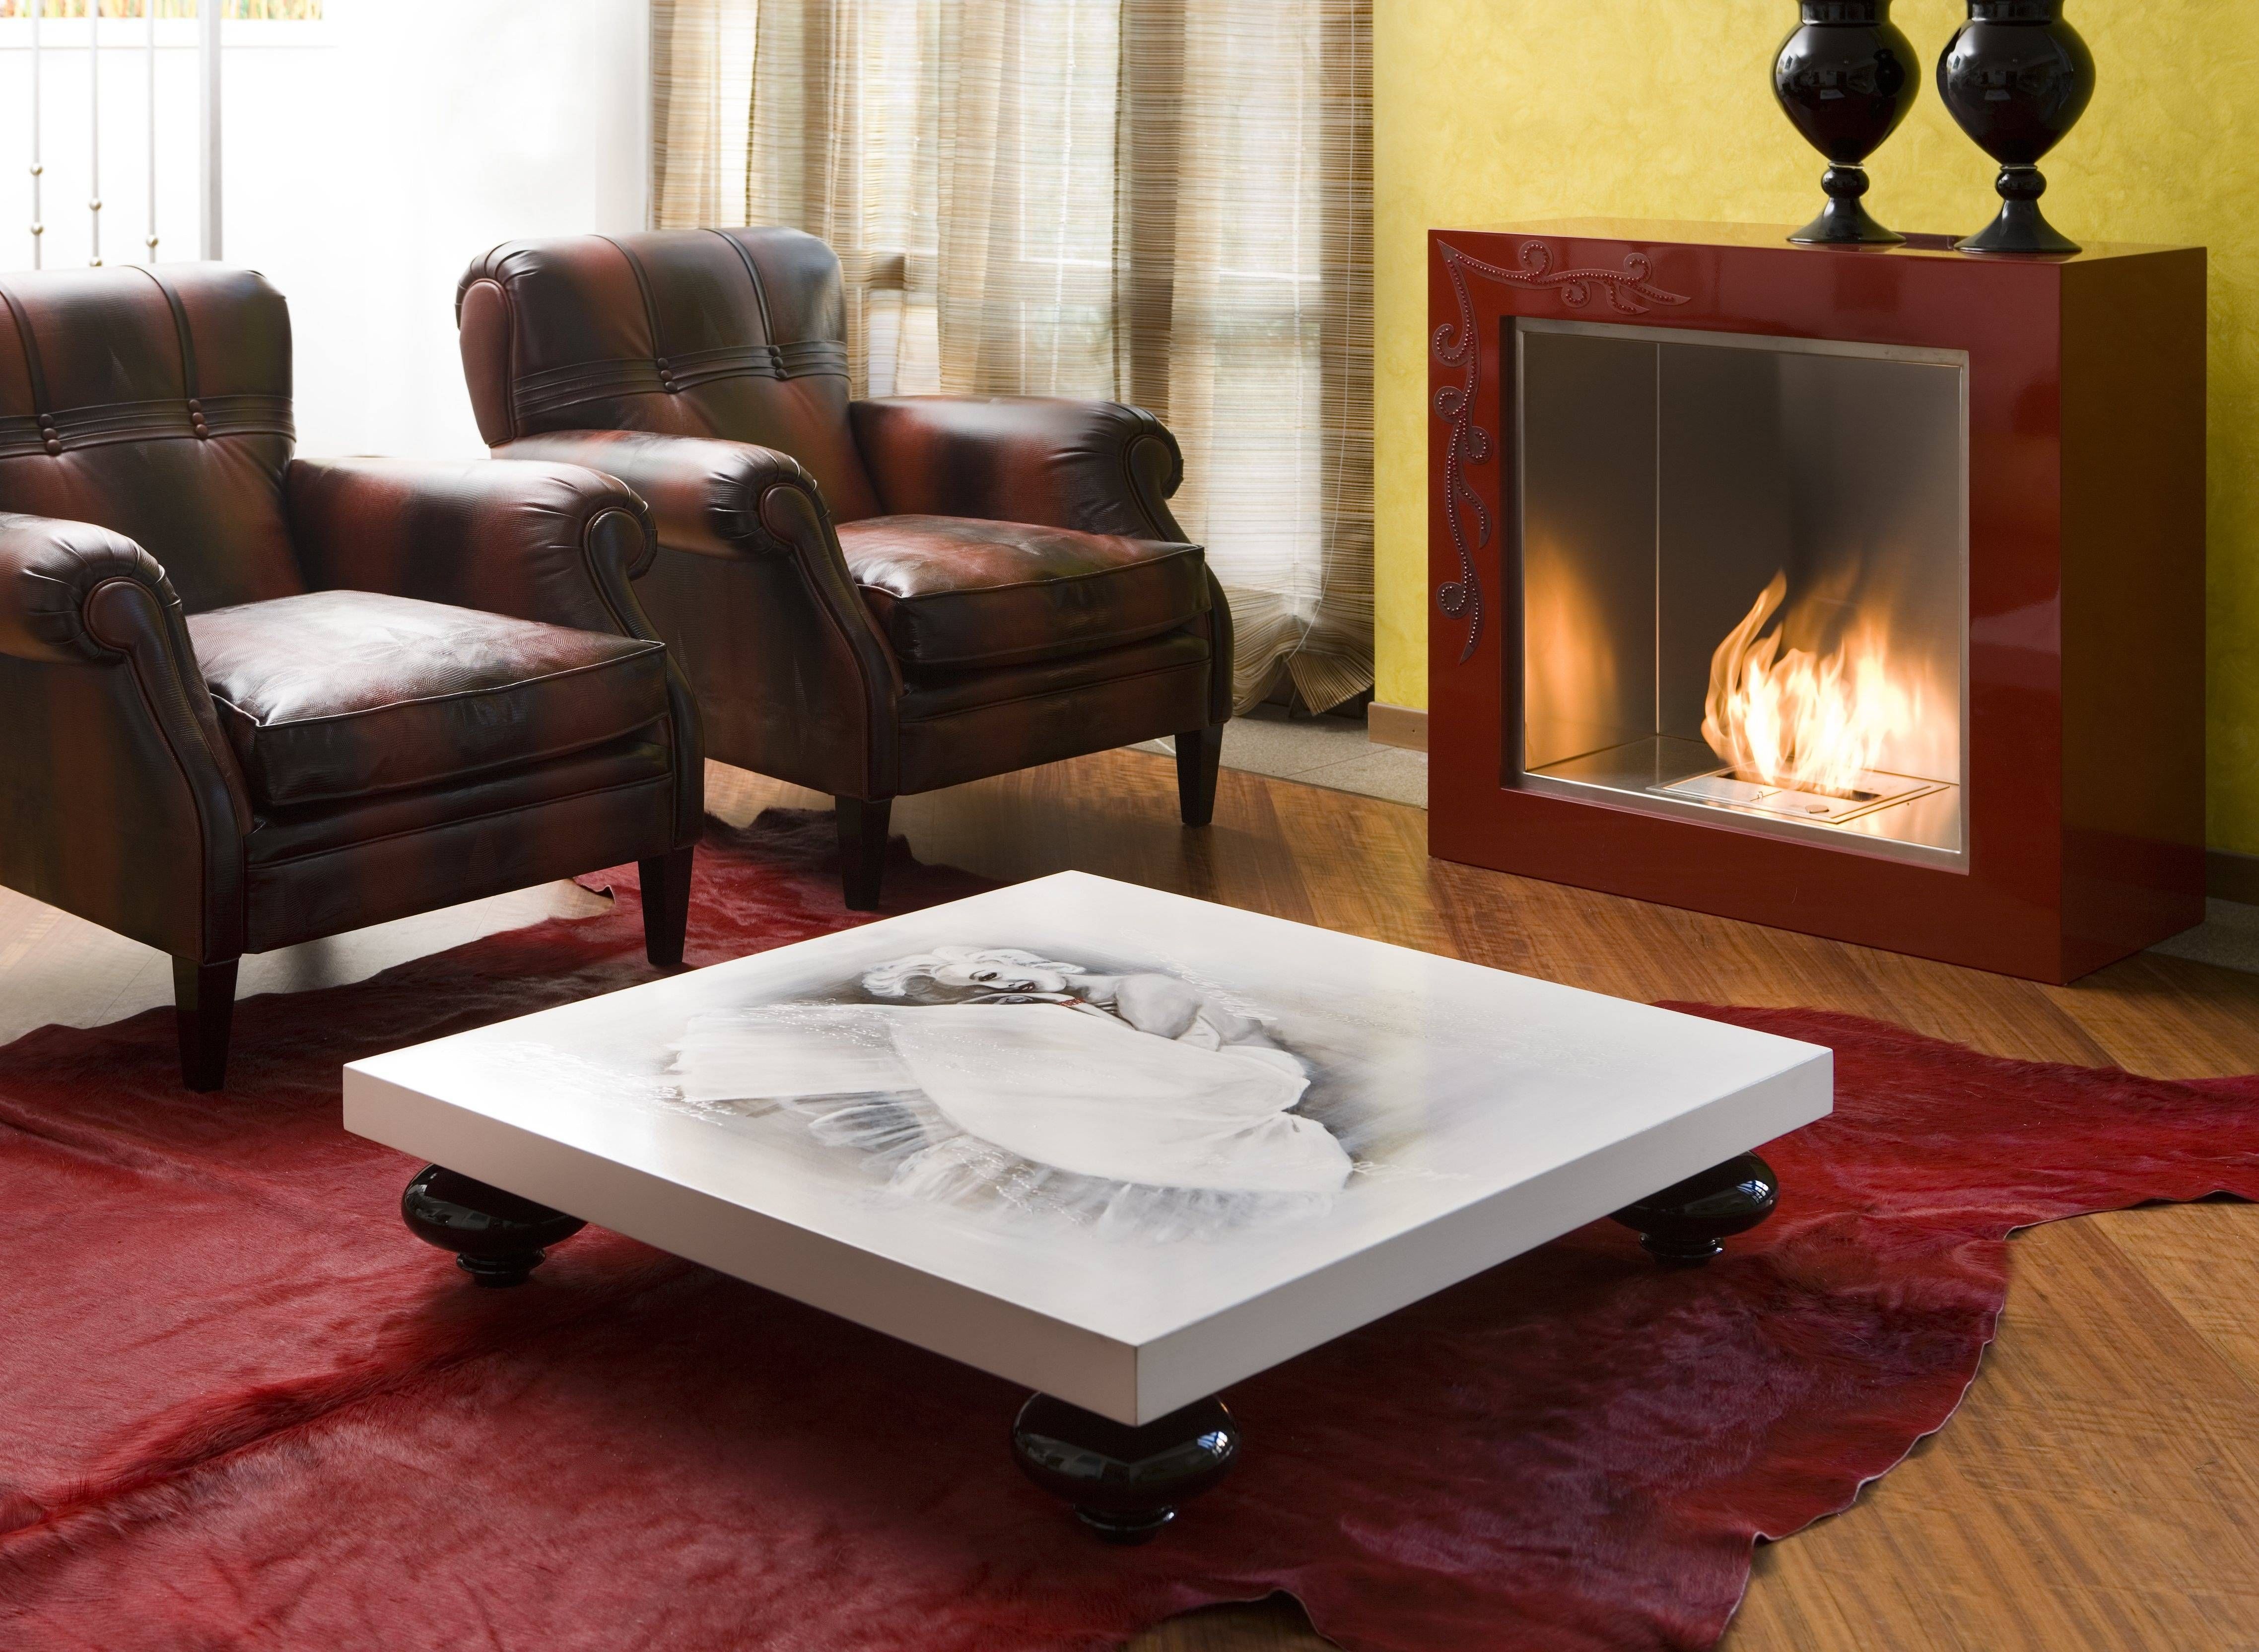 Mirrored Dark Coffee Table Artistic / Thippo In Large Square Coffee Tables (View 30 of 30)